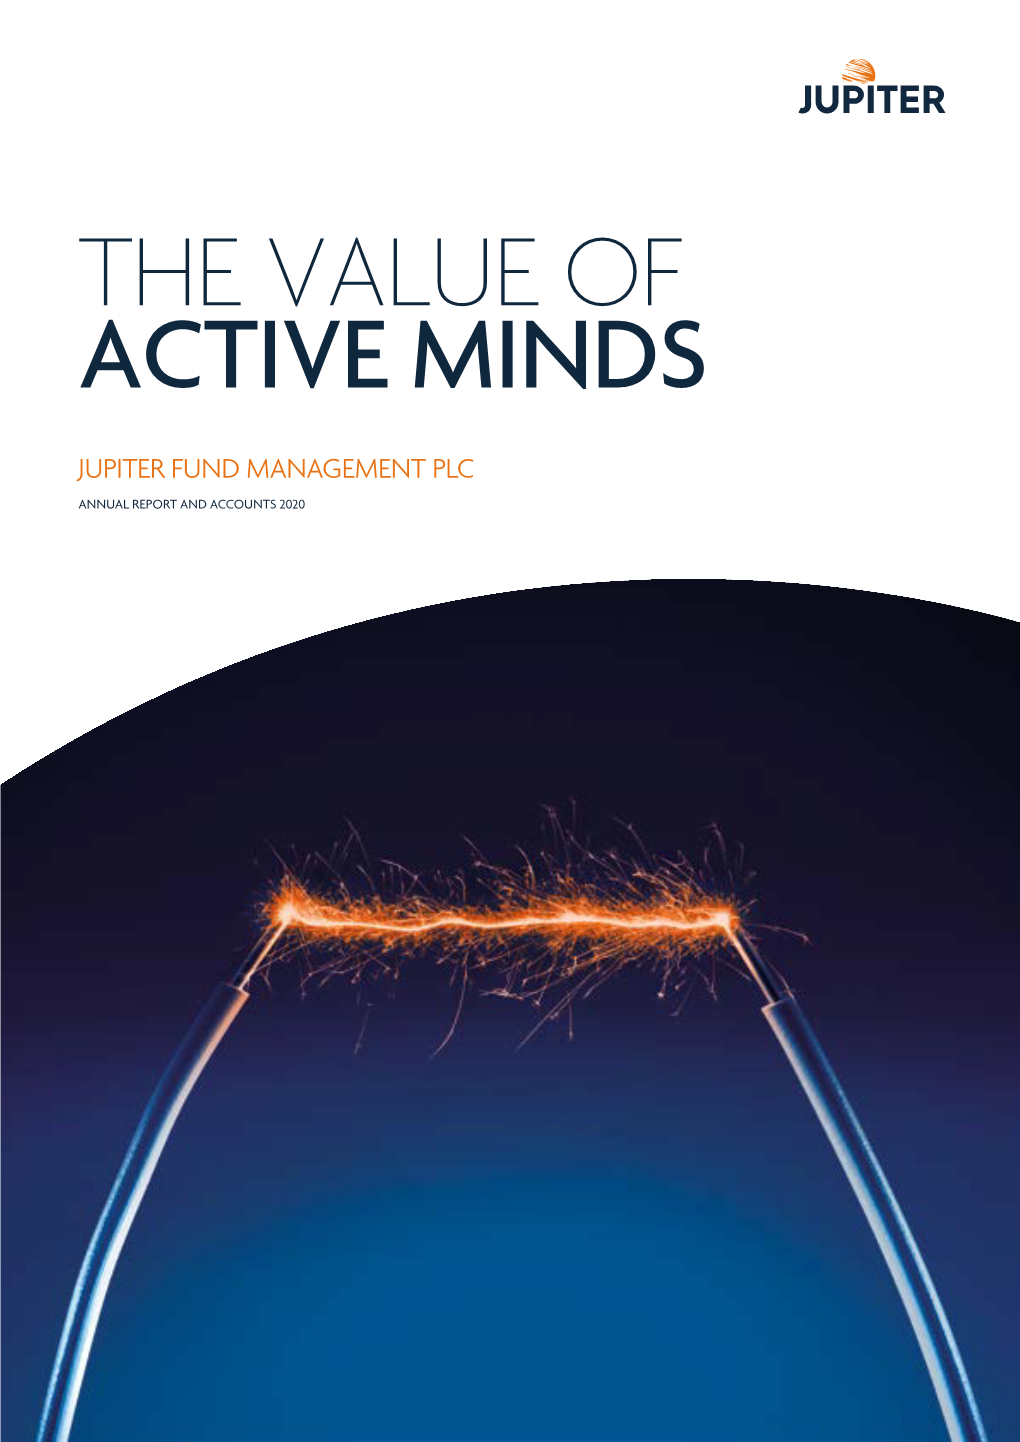 The Value of Active Minds